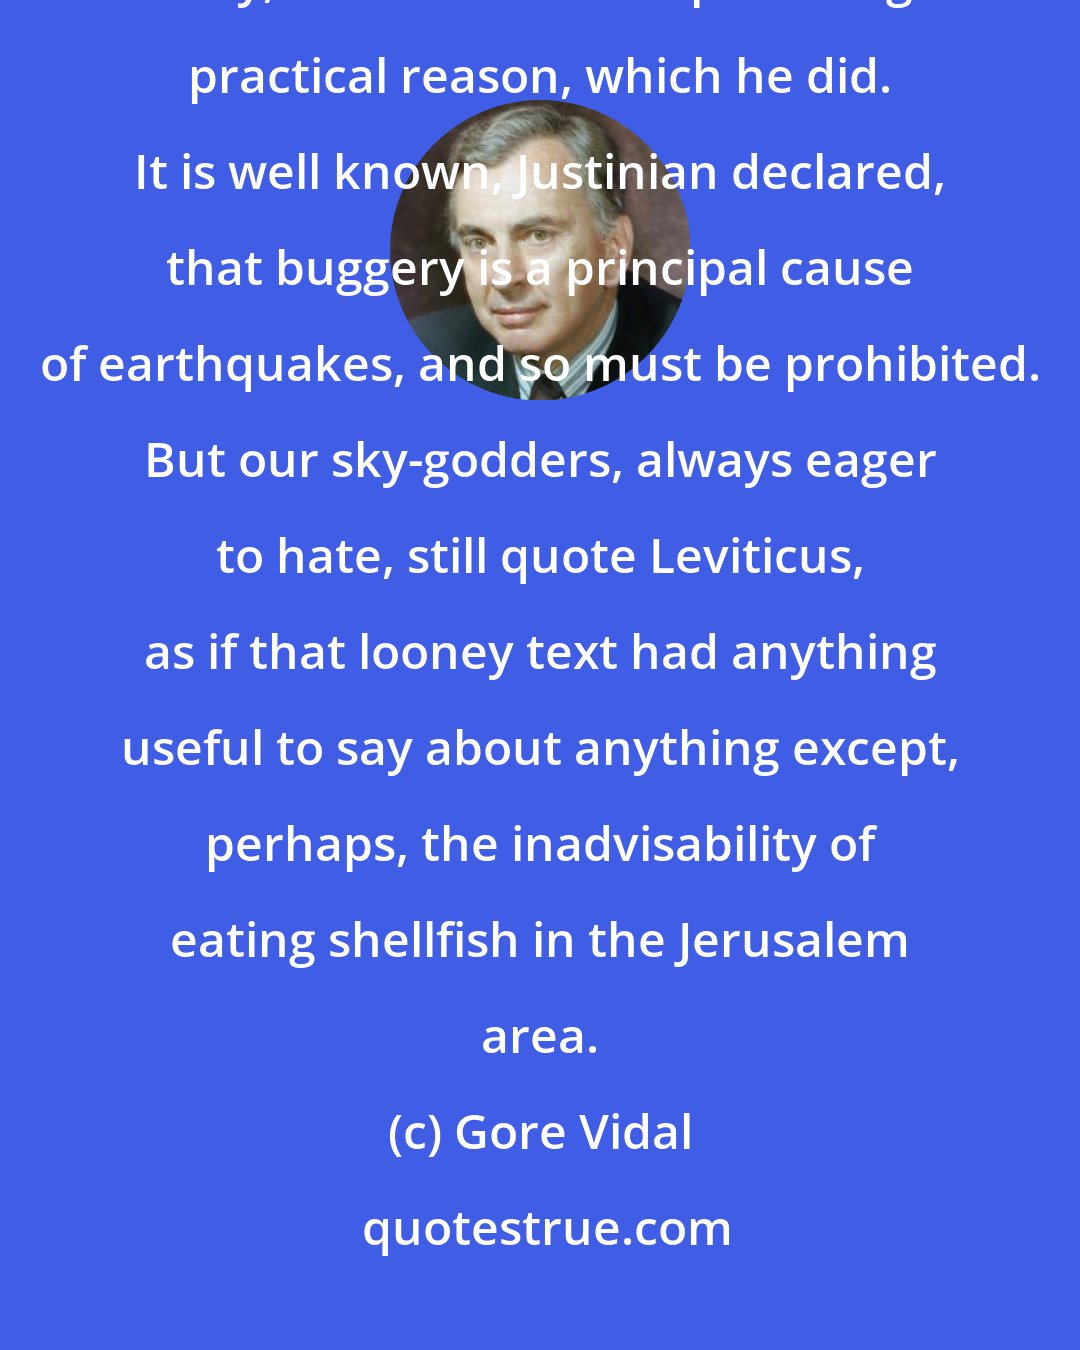 Gore Vidal: At least when the Emperor Justinian, a sky-god man, decided to outlaw sodomy, he had to come up with a good practical reason, which he did. It is well known, Justinian declared, that buggery is a principal cause of earthquakes, and so must be prohibited. But our sky-godders, always eager to hate, still quote Leviticus, as if that looney text had anything useful to say about anything except, perhaps, the inadvisability of eating shellfish in the Jerusalem area.